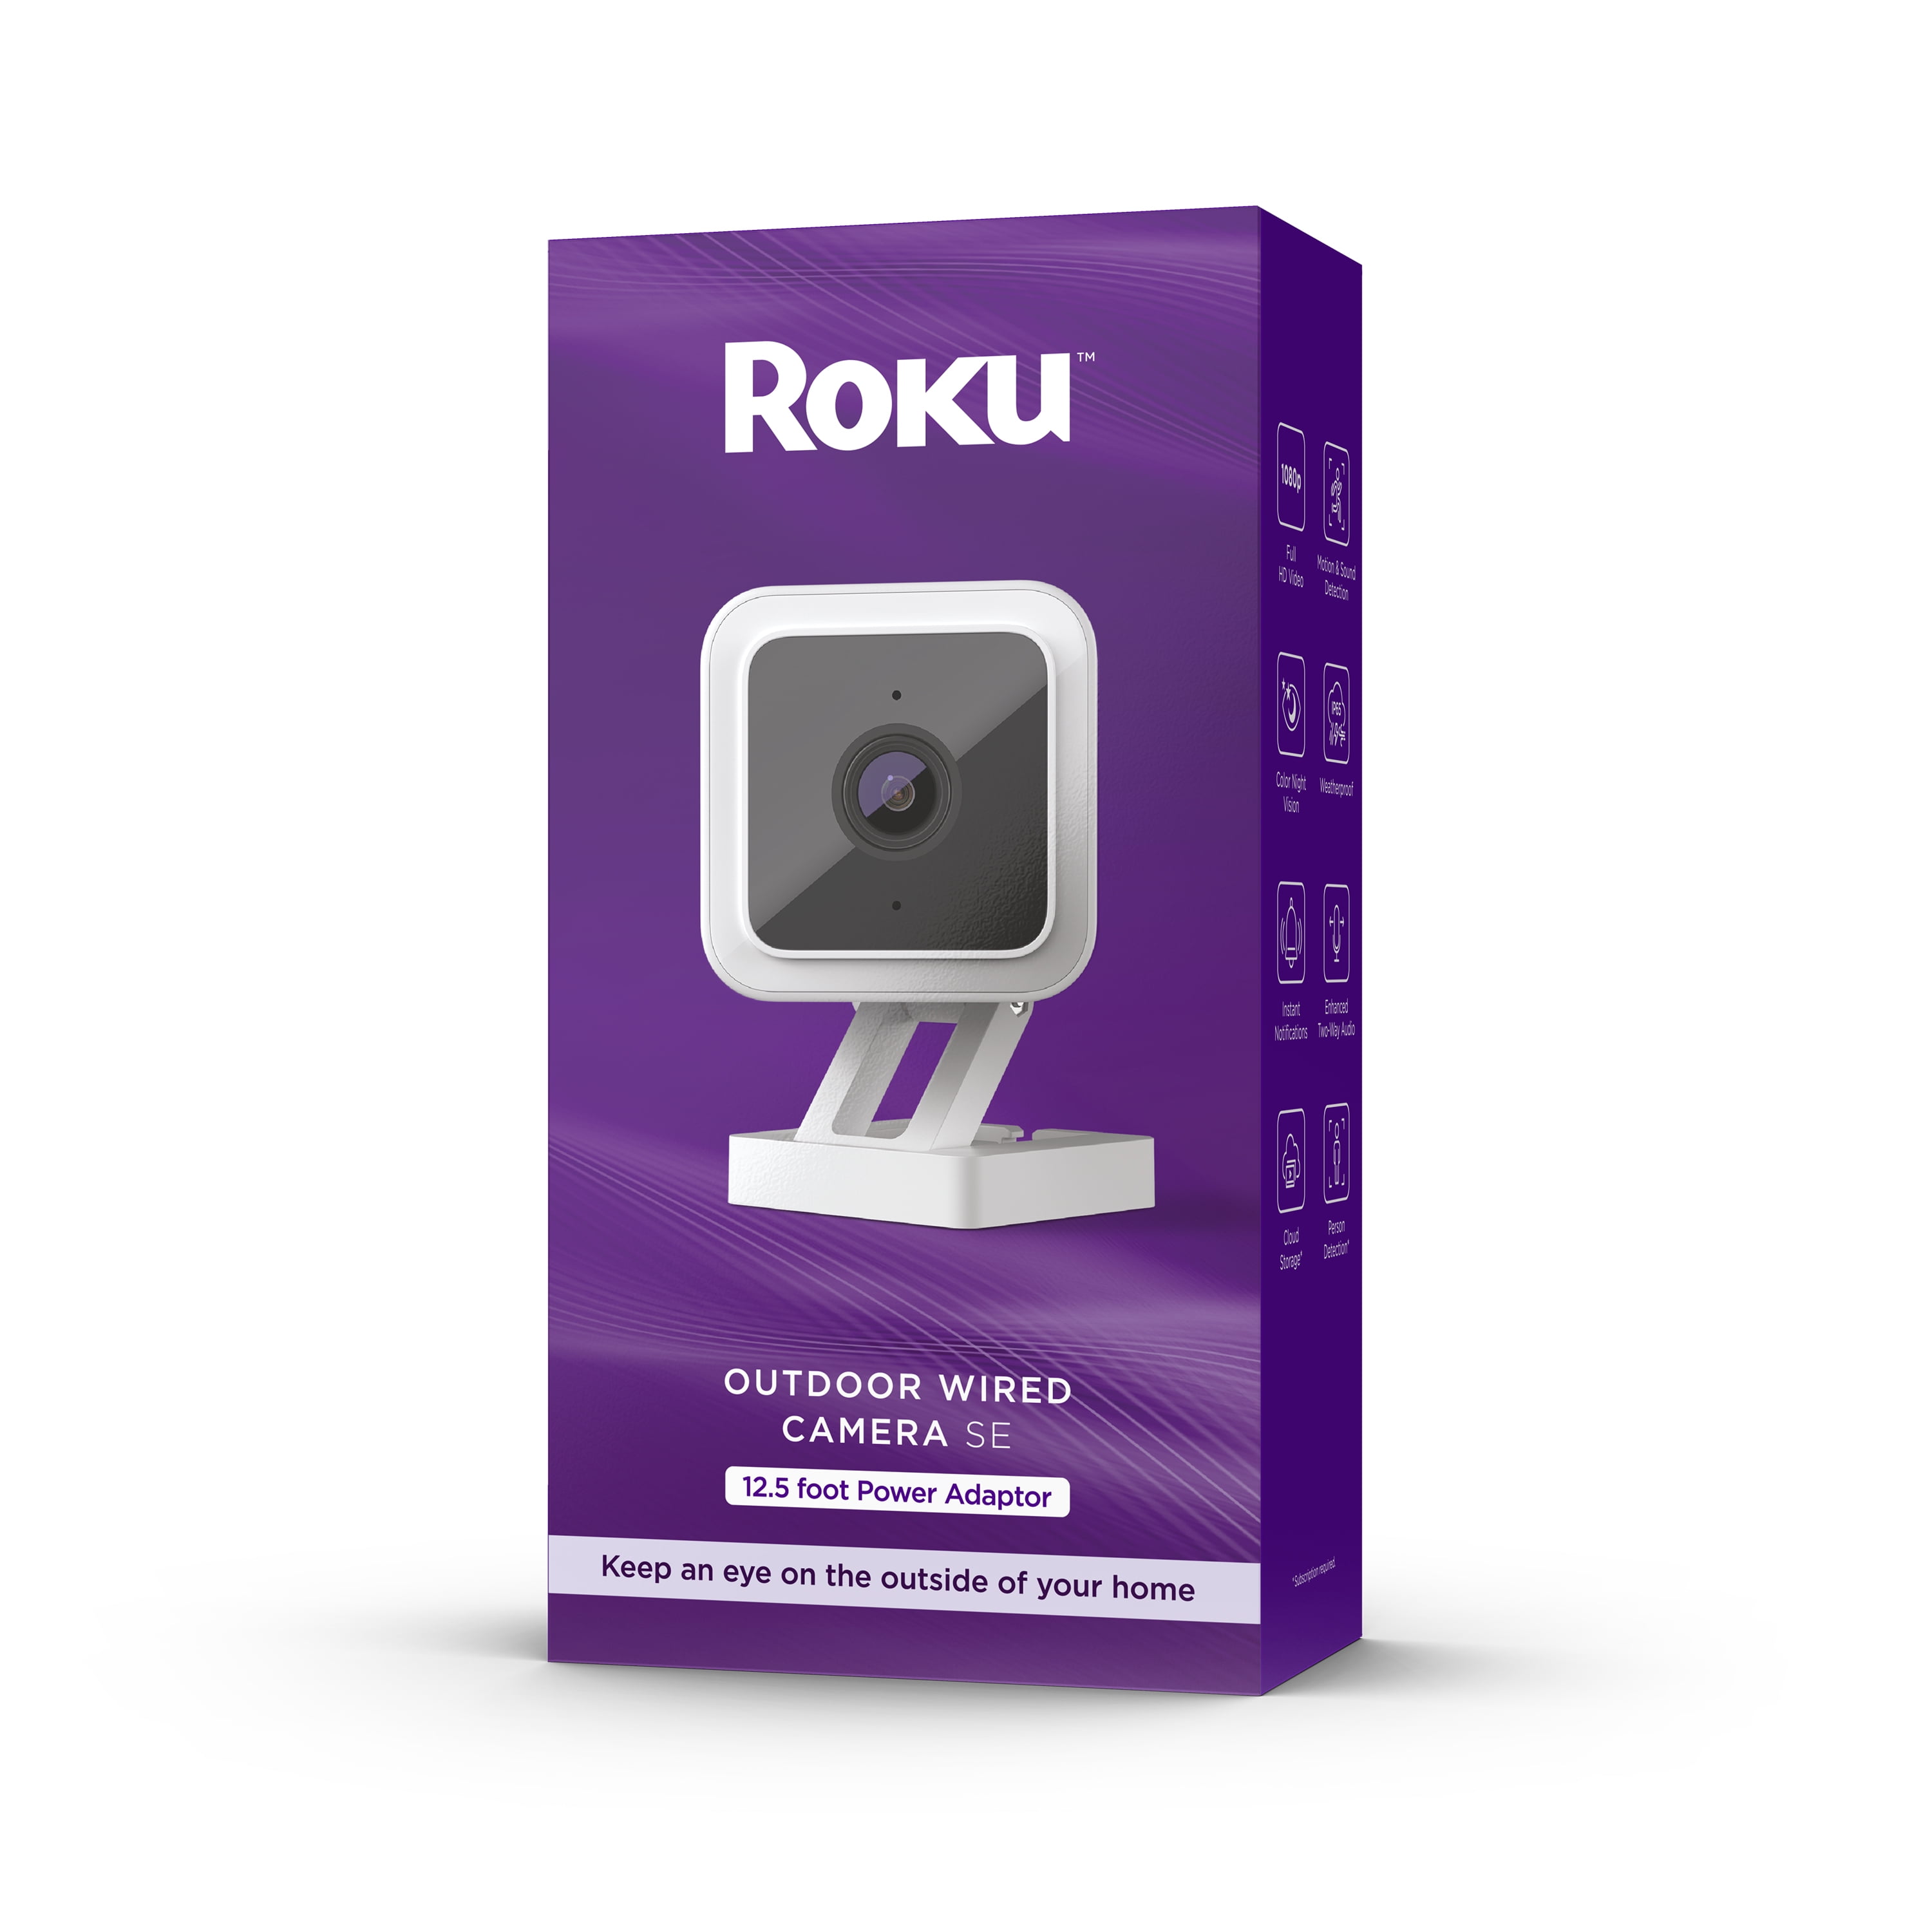 Roku Smart Home Outdoor Wired Camera SE Wi-Fi-Connected Security Surveillance Camera with Motion & Sound Detection